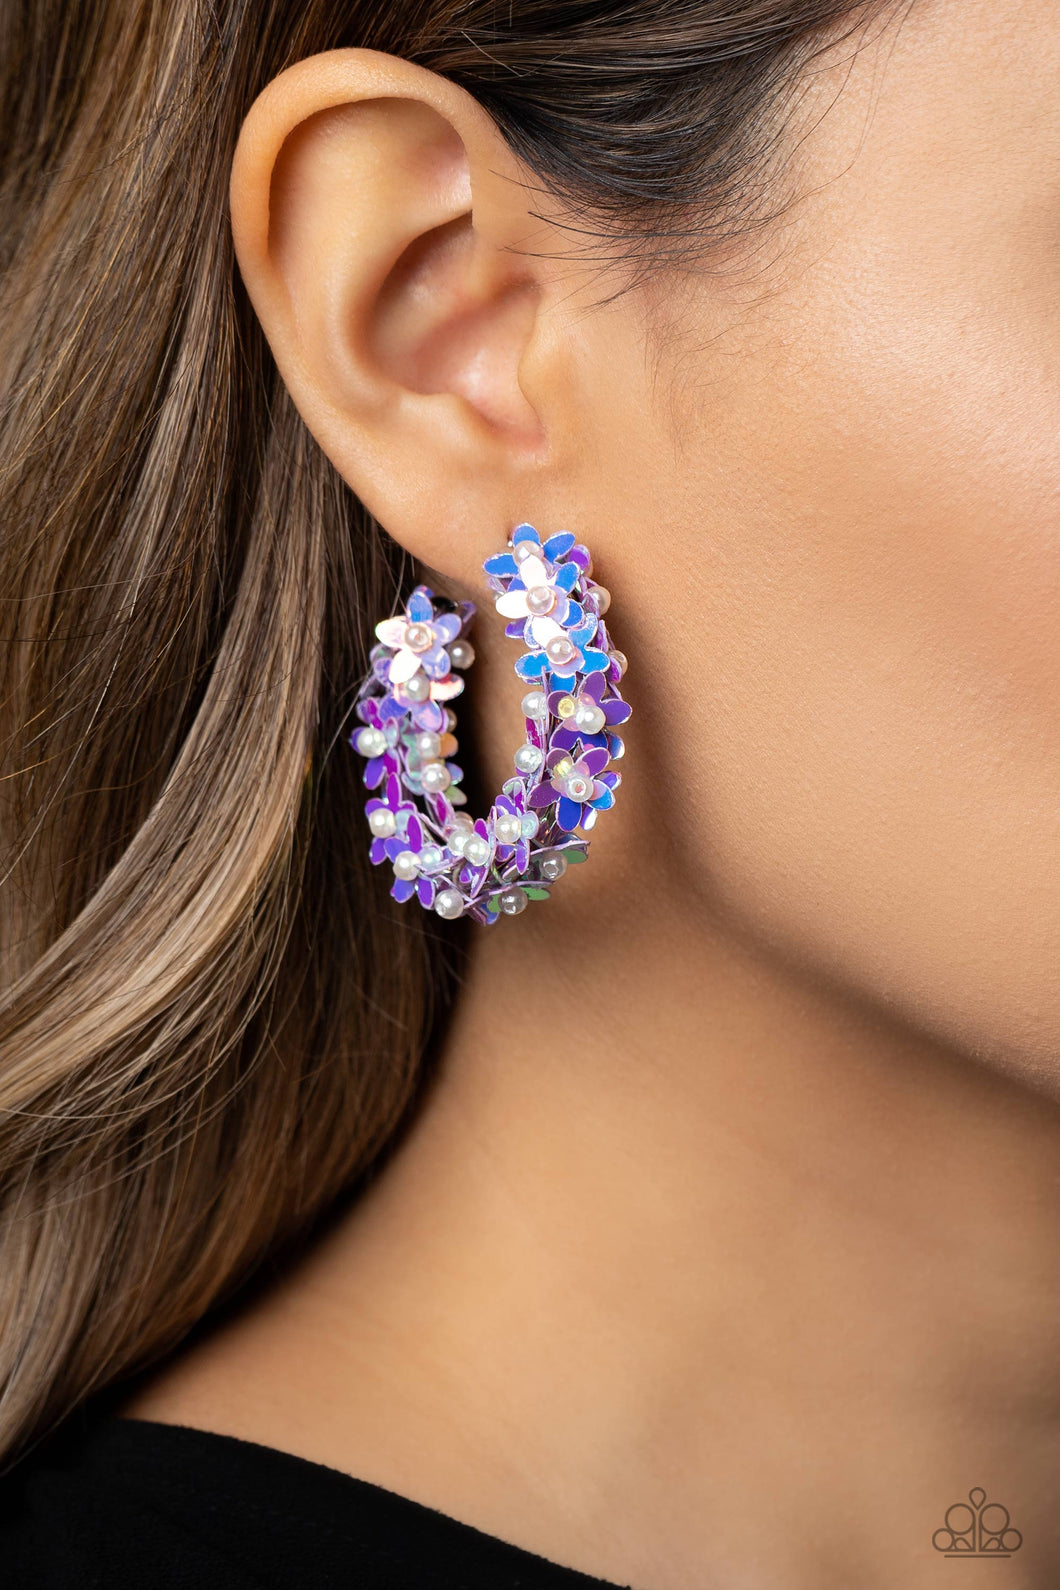 A floral explosion, encompassing the entirety of a thick silver hoop, features reflective lavender flowers dotted with dainty pearl centers for a dreamy, whimsicality below the ear. Earring attaches to a standard post fitting. Hoop measures approximately 1 1/2